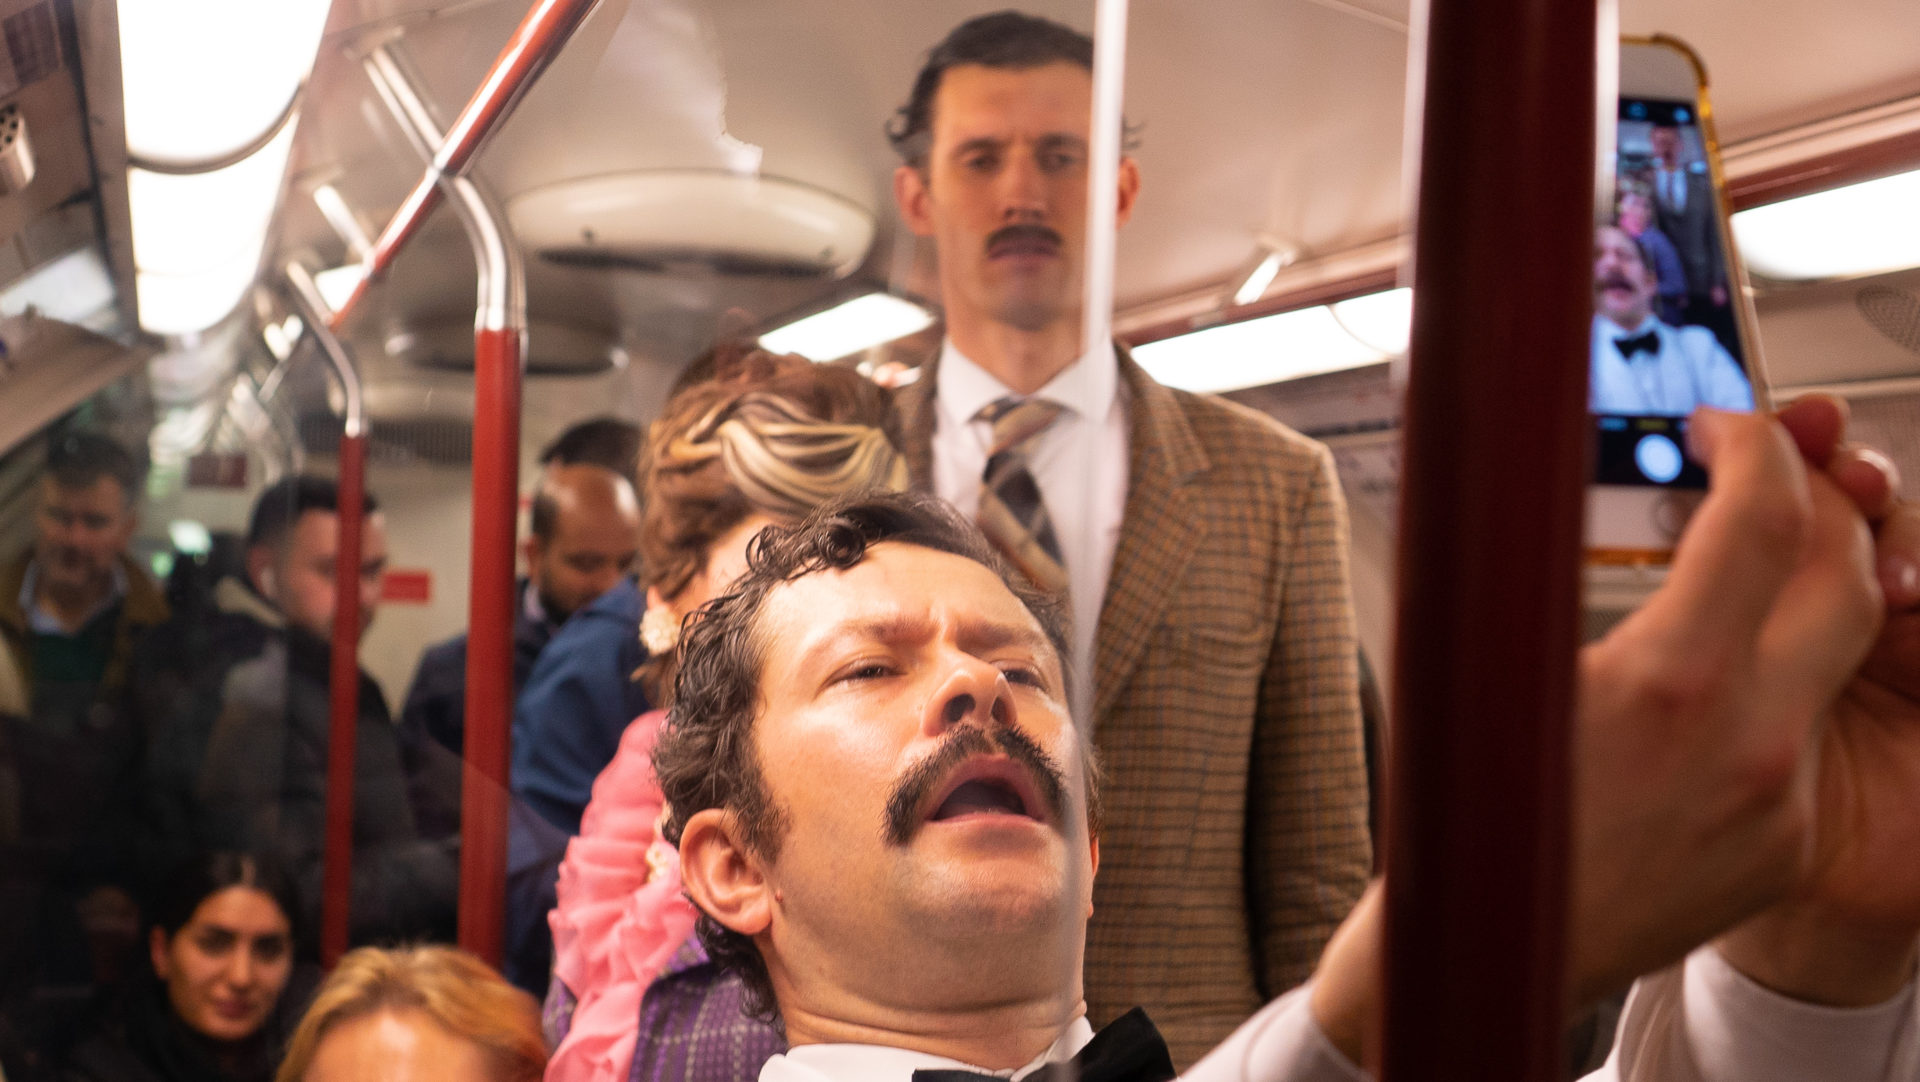 Faulty Towers - Havoc On the Bakerloo - Mellor&Smith